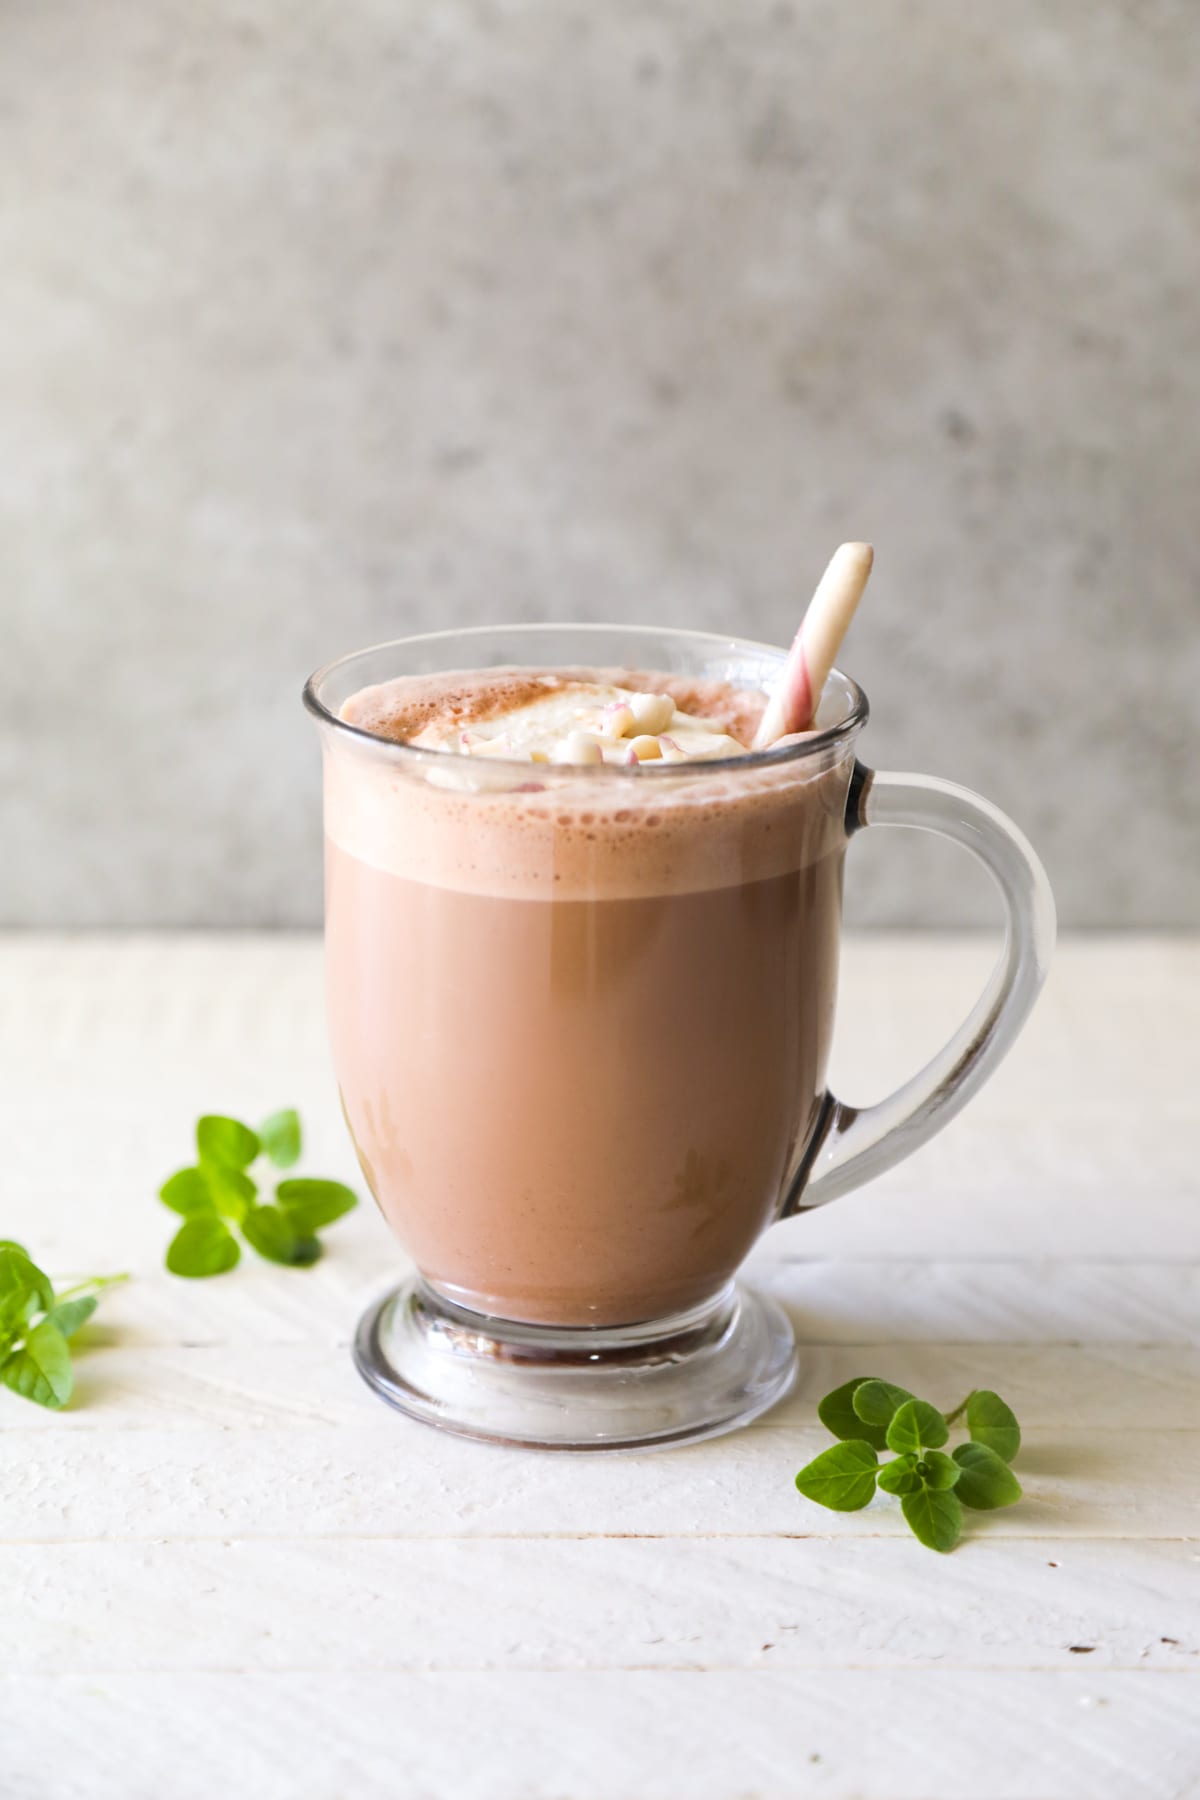 So delicious and easy. A real food style mocha peppermint latte.